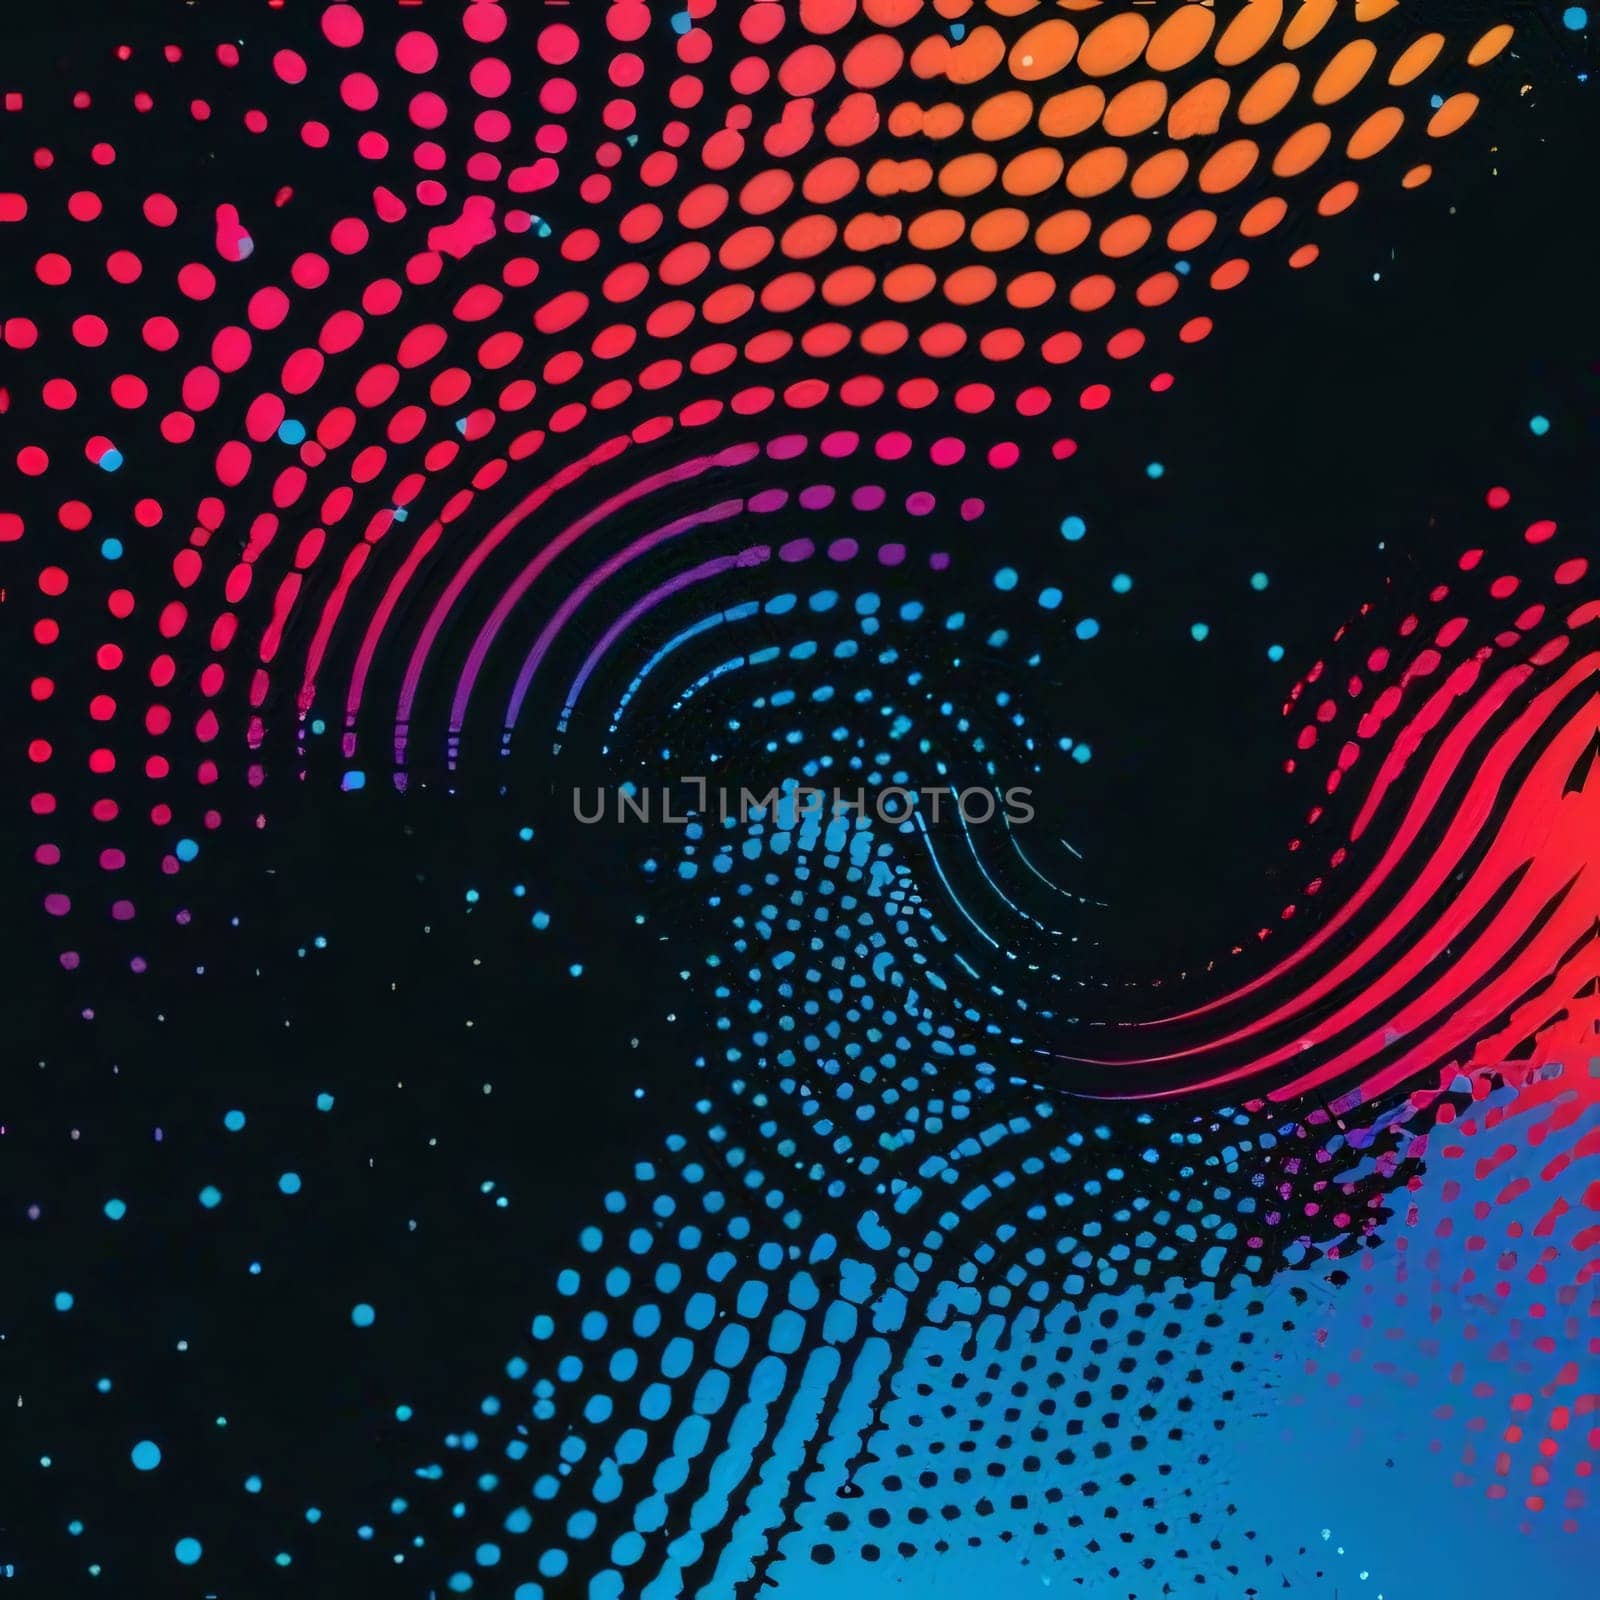 Abstract background design: Abstract background with halftone dots. Vector illustration for your design